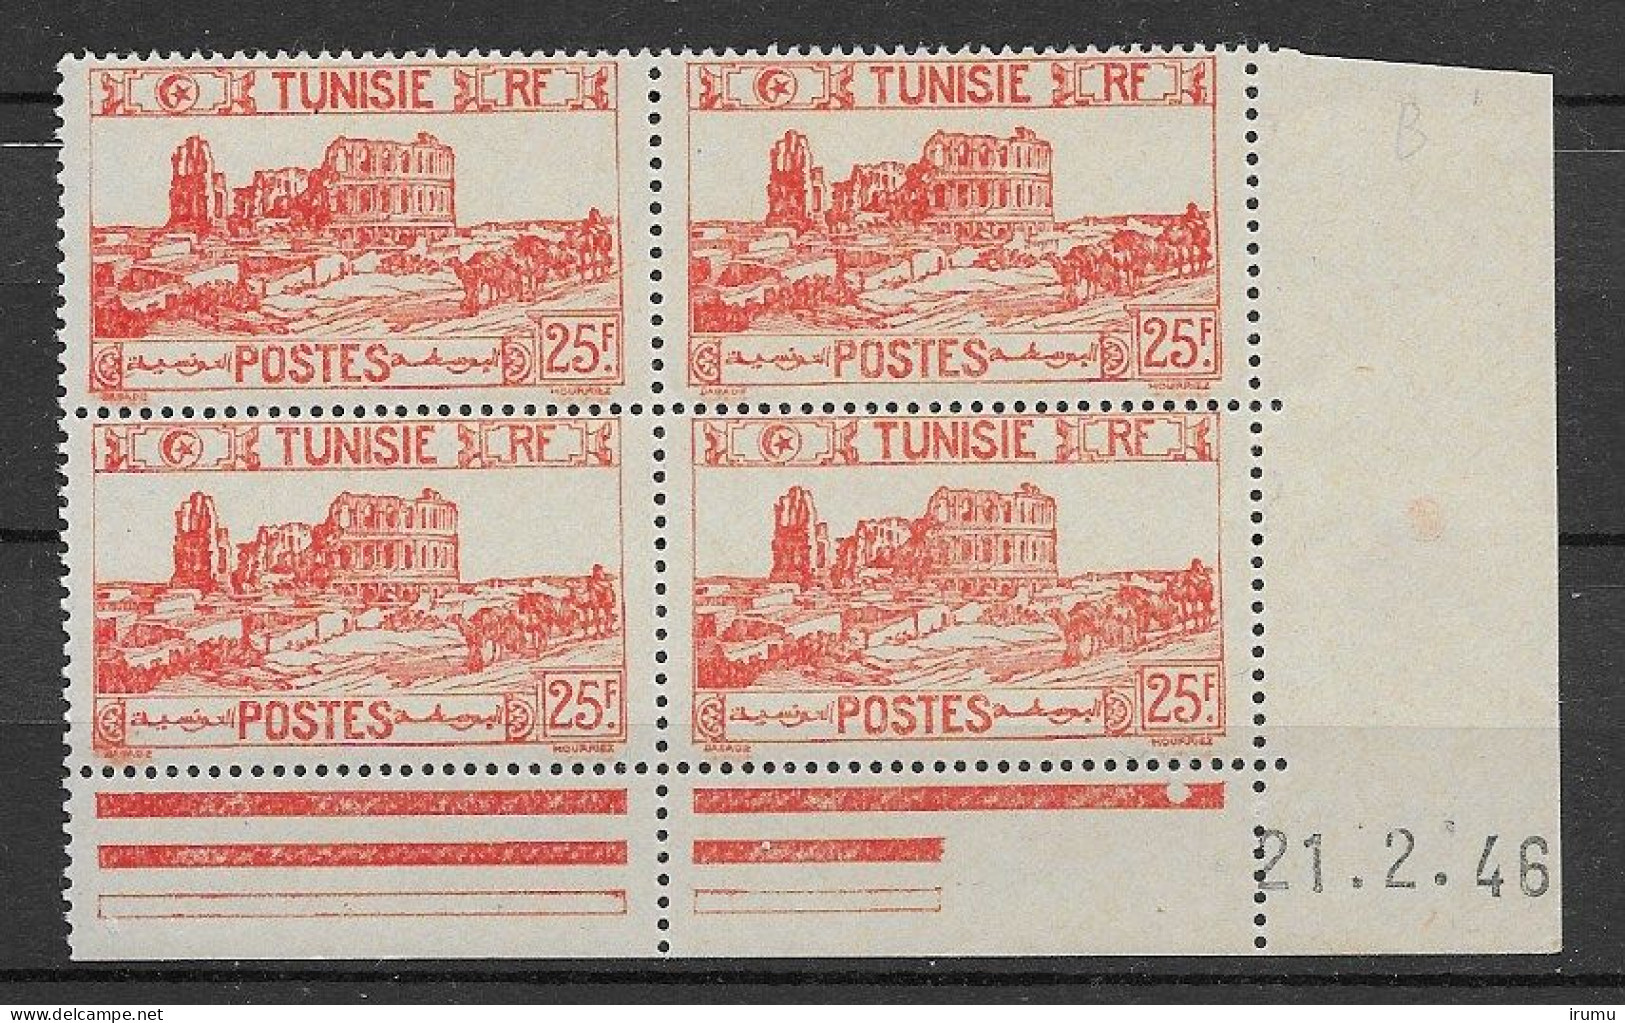 Tunisie Y&T 296, Coin Daté 21.2.46 (SN 2892) - Unused Stamps